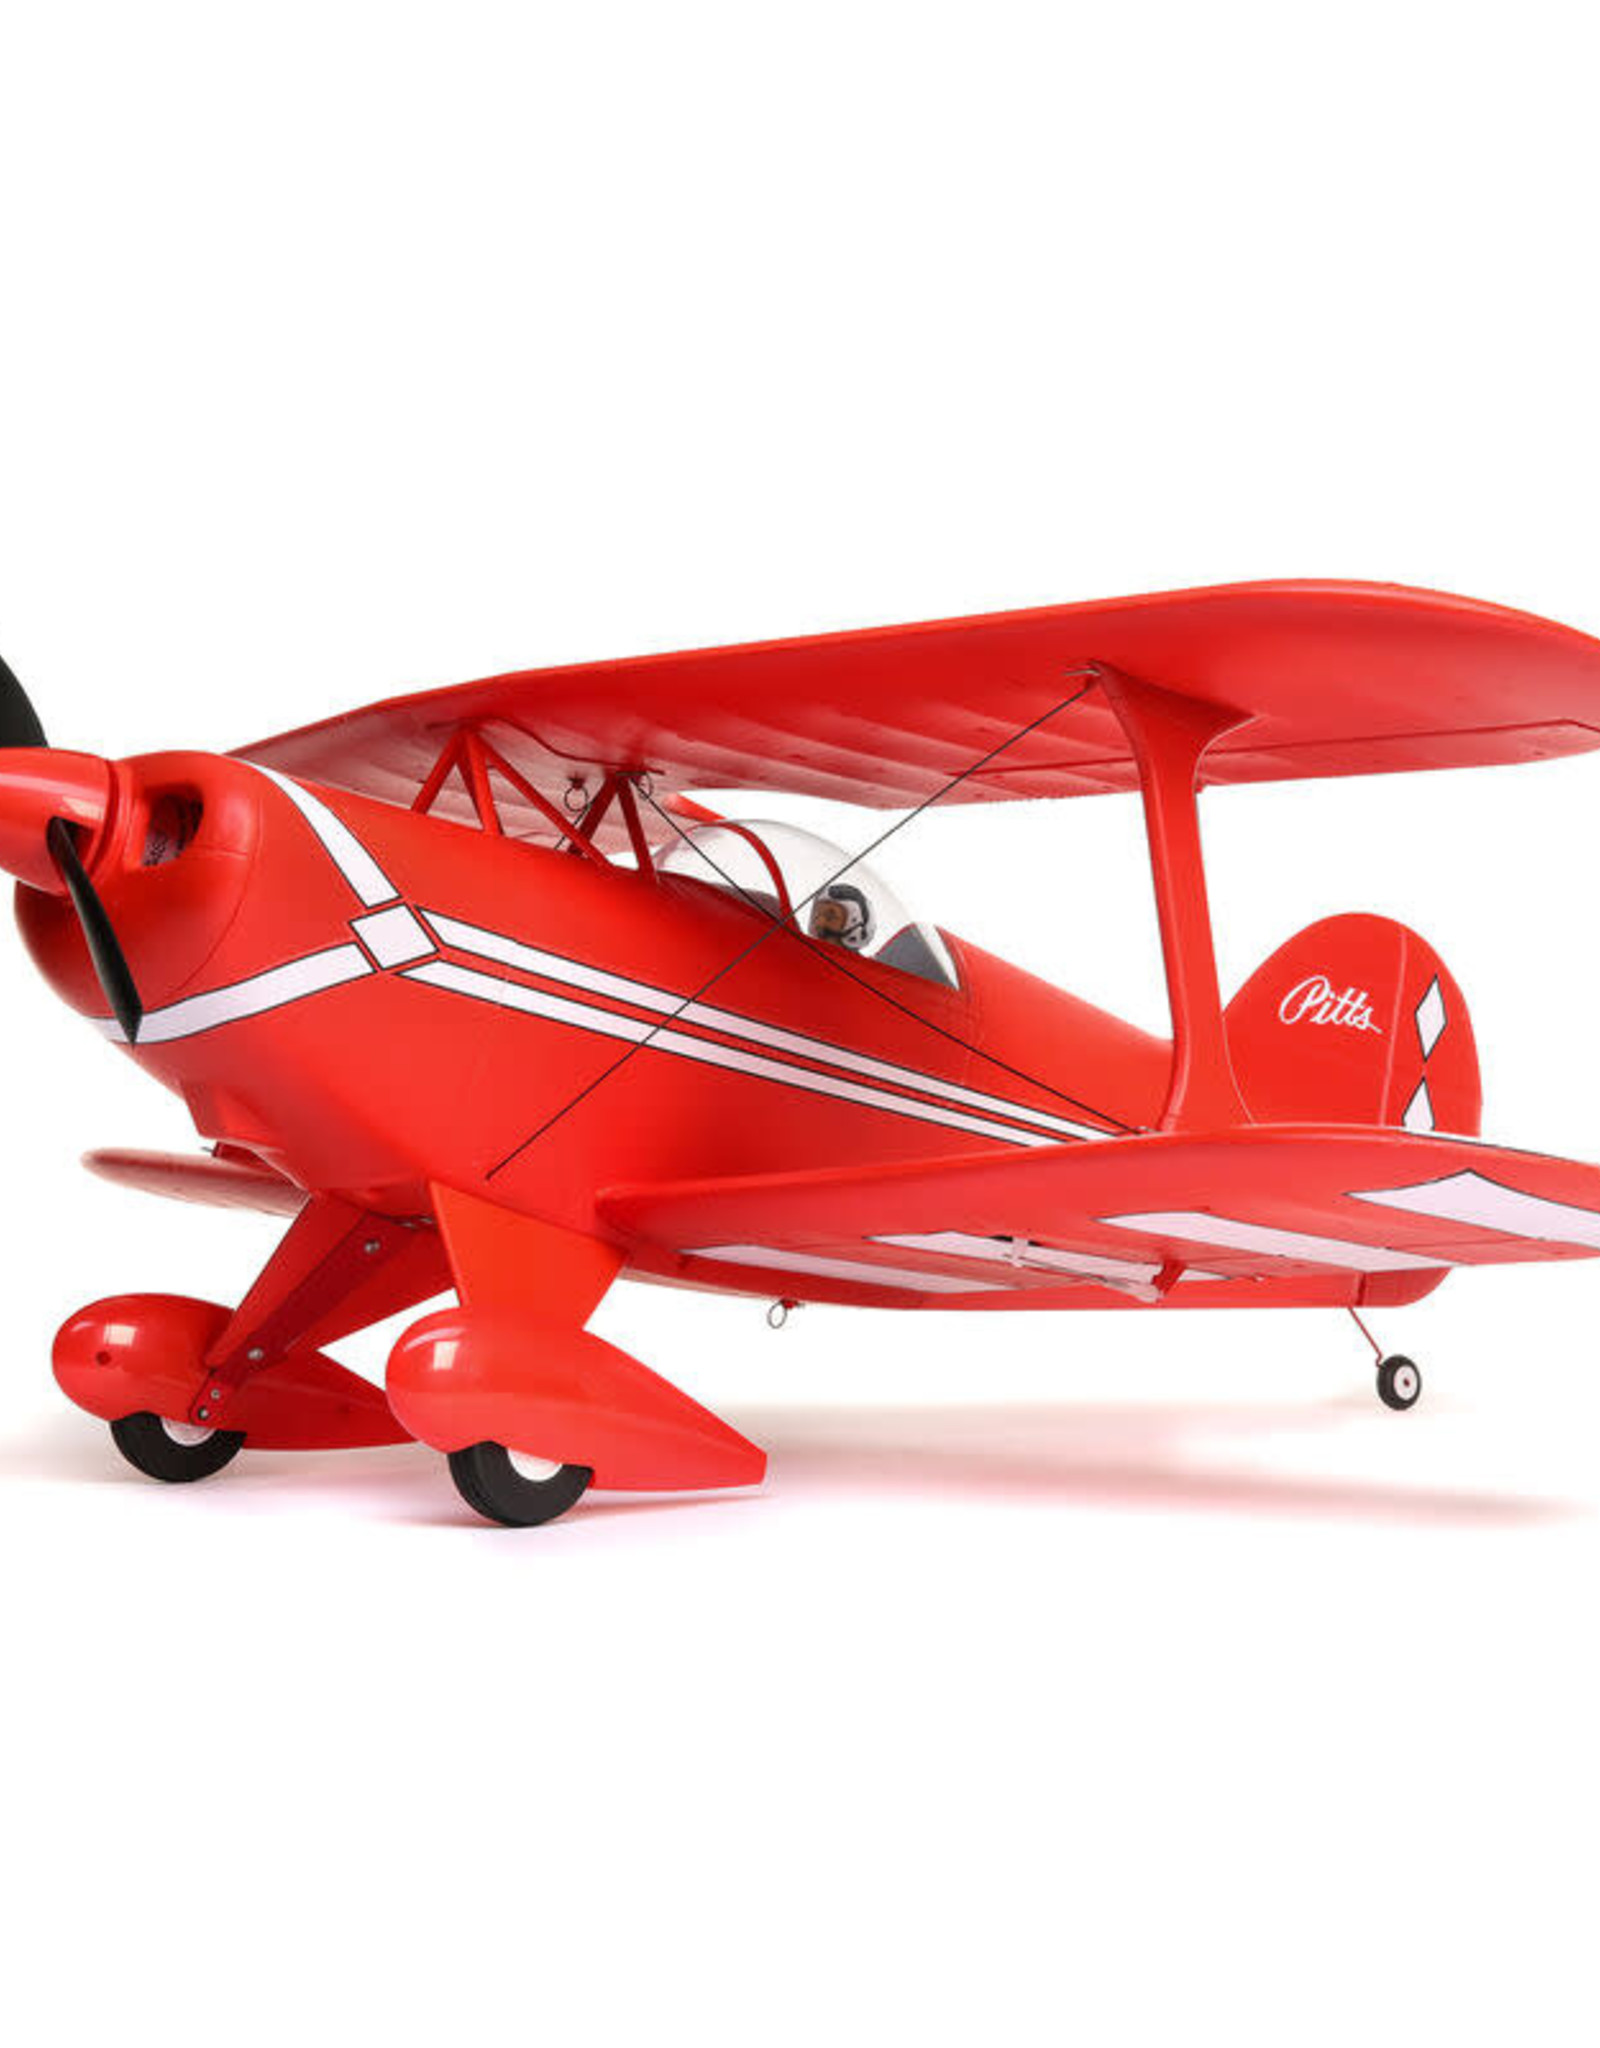 eflite EFL35500 Pitts 850mm BNF Basic w/ AS3X/SAFE Select